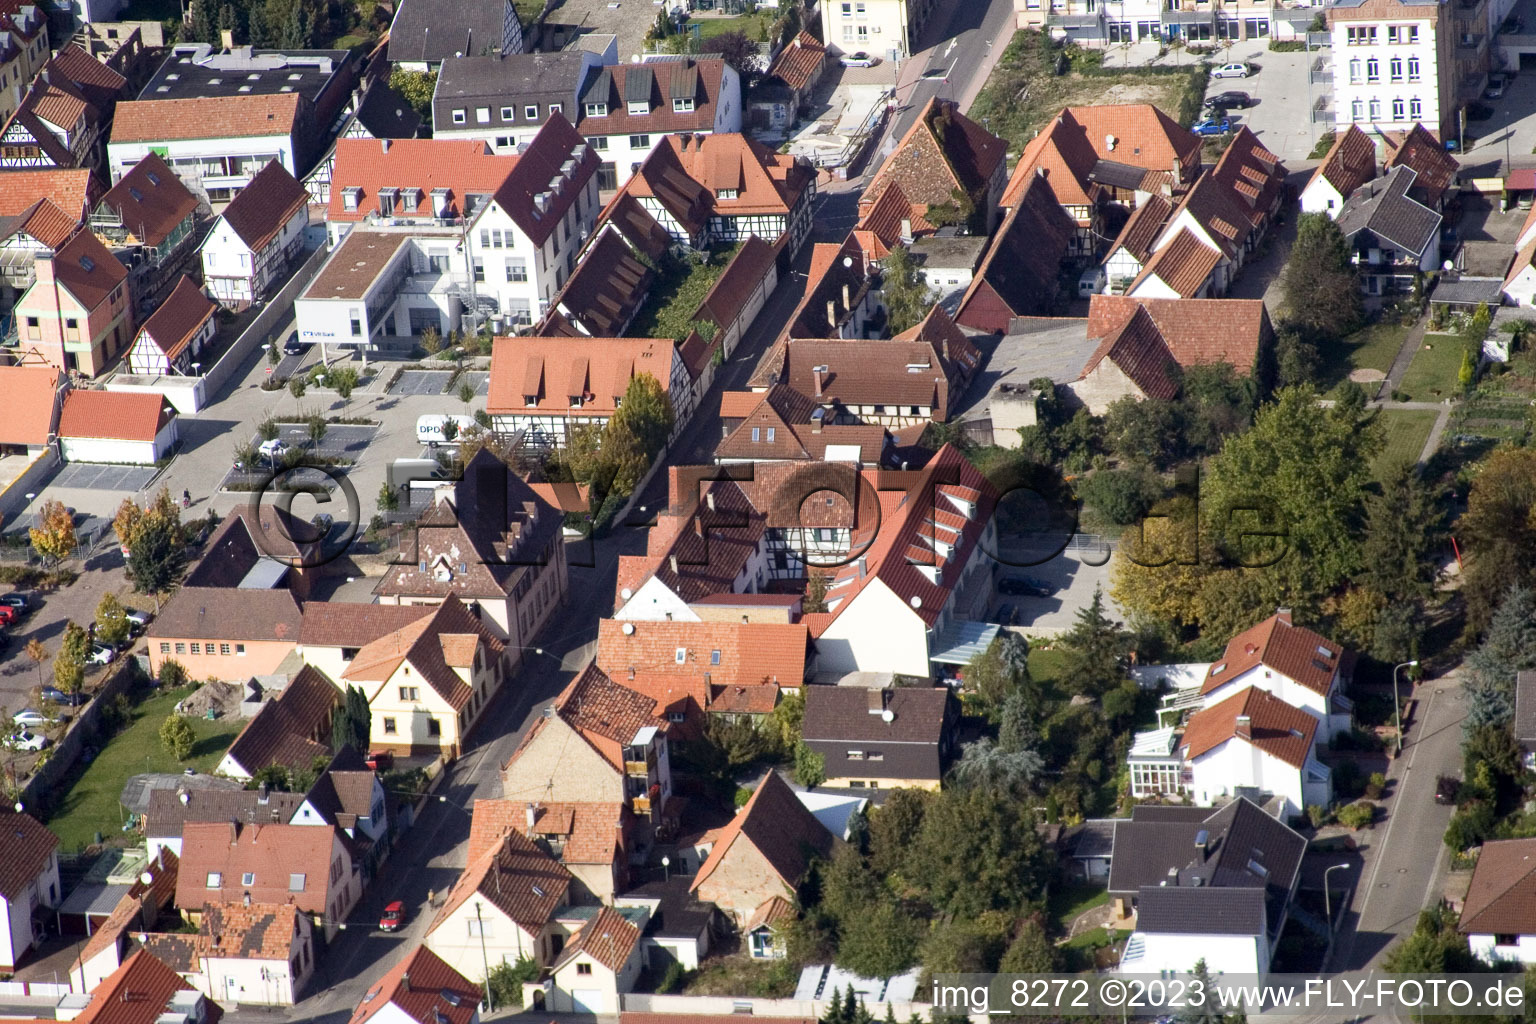 Aerial view of Bahnhofstrasse in Kandel in the state Rhineland-Palatinate, Germany